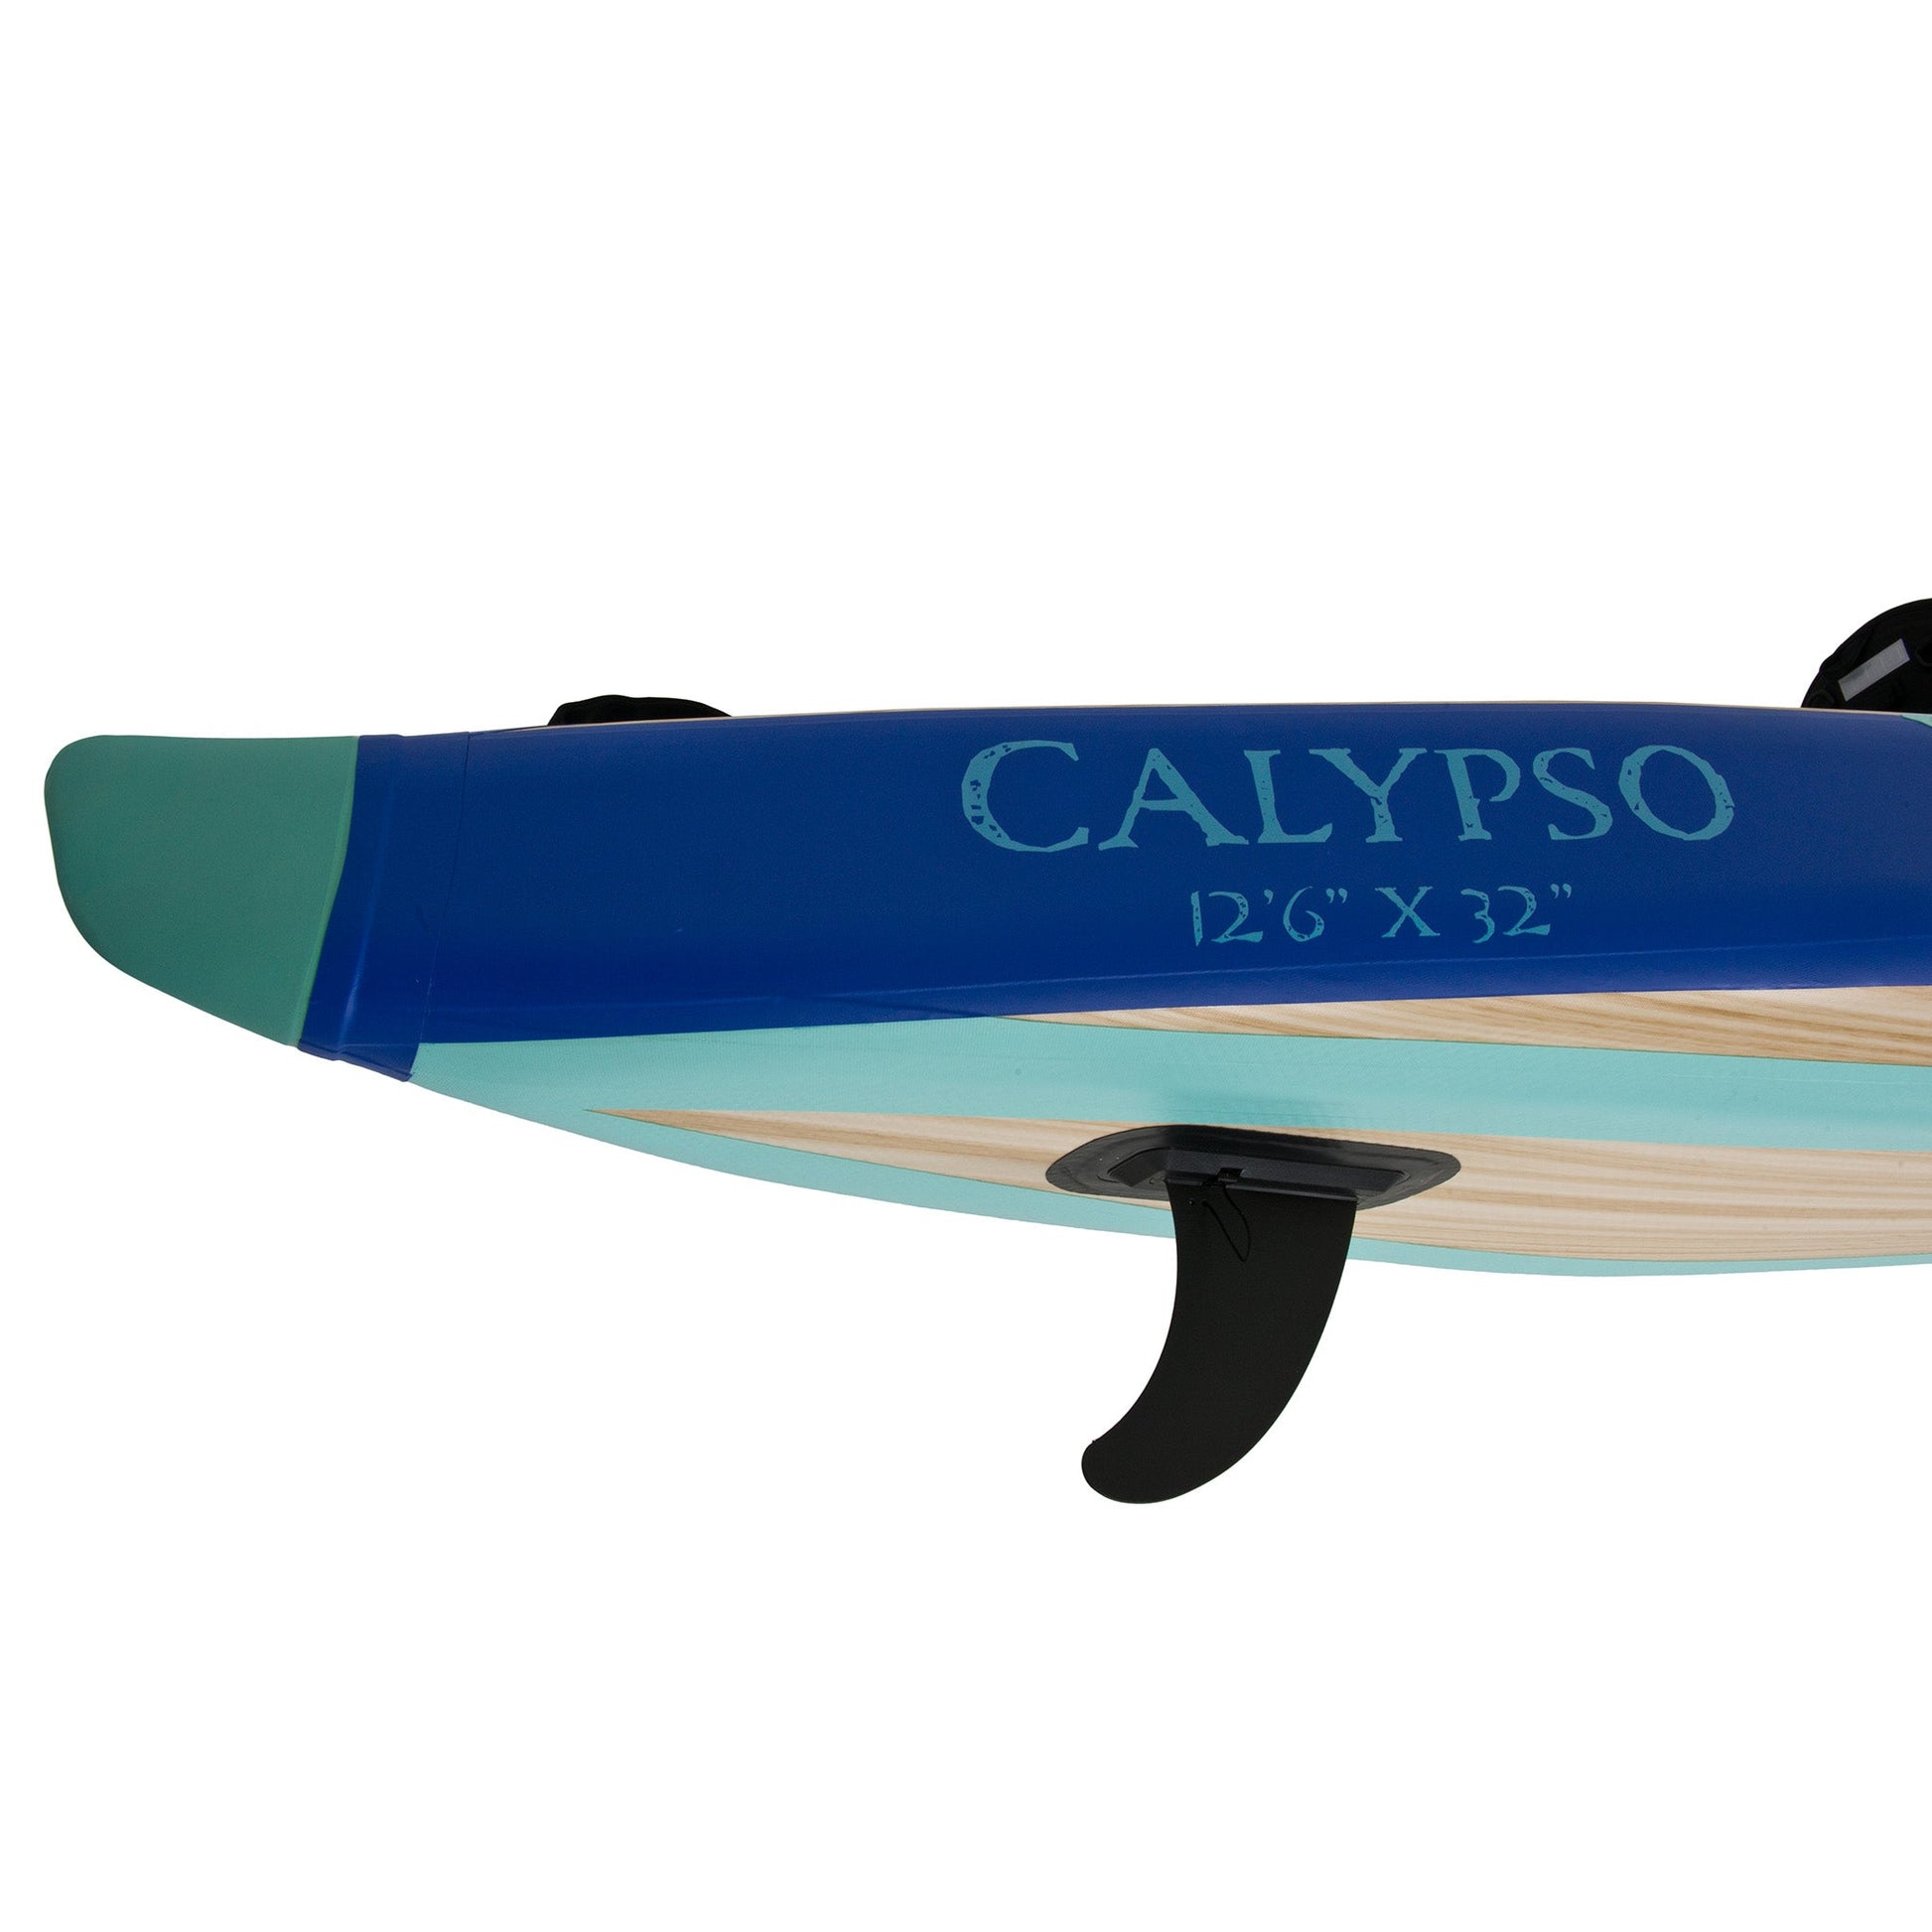 fin view of the inflatable kayak